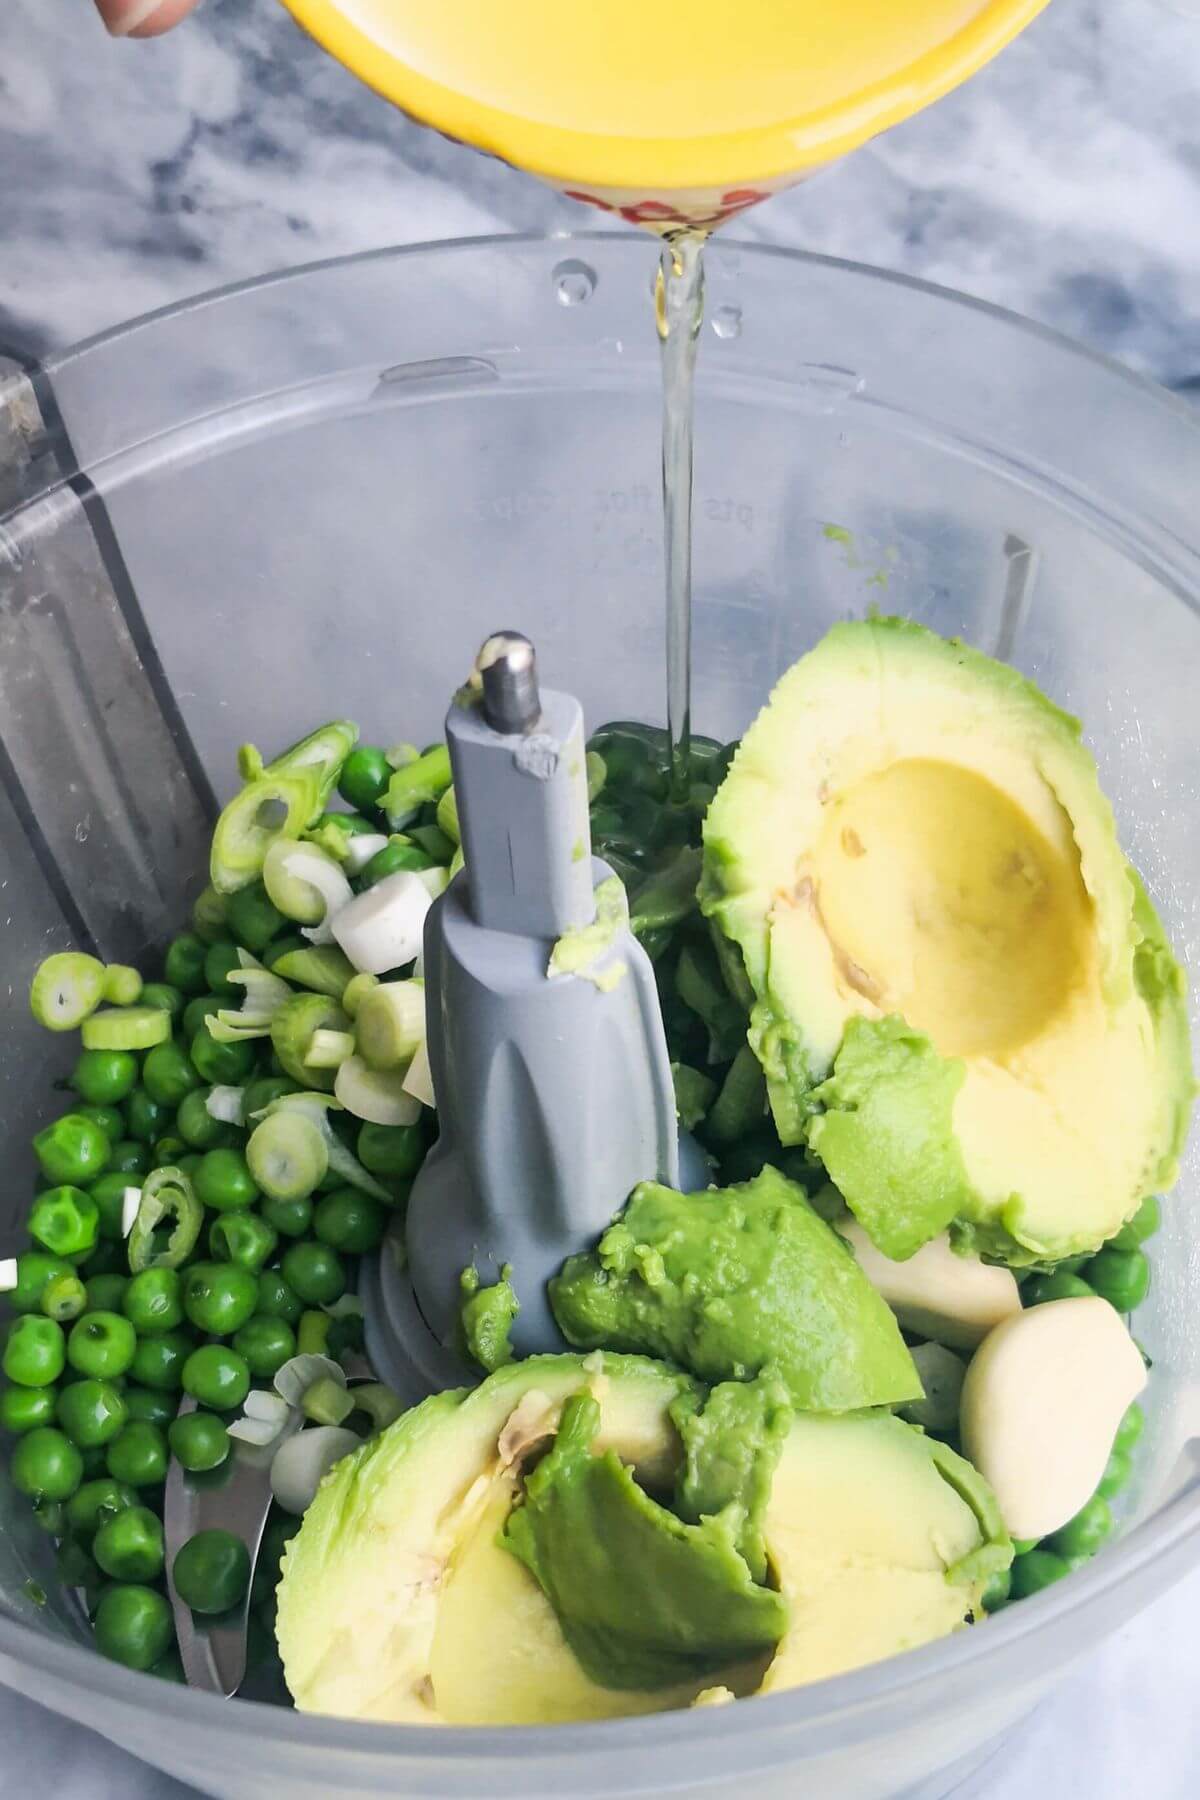 Olive oil being added to the bowl of a food processor with avocado, garlic and peas.